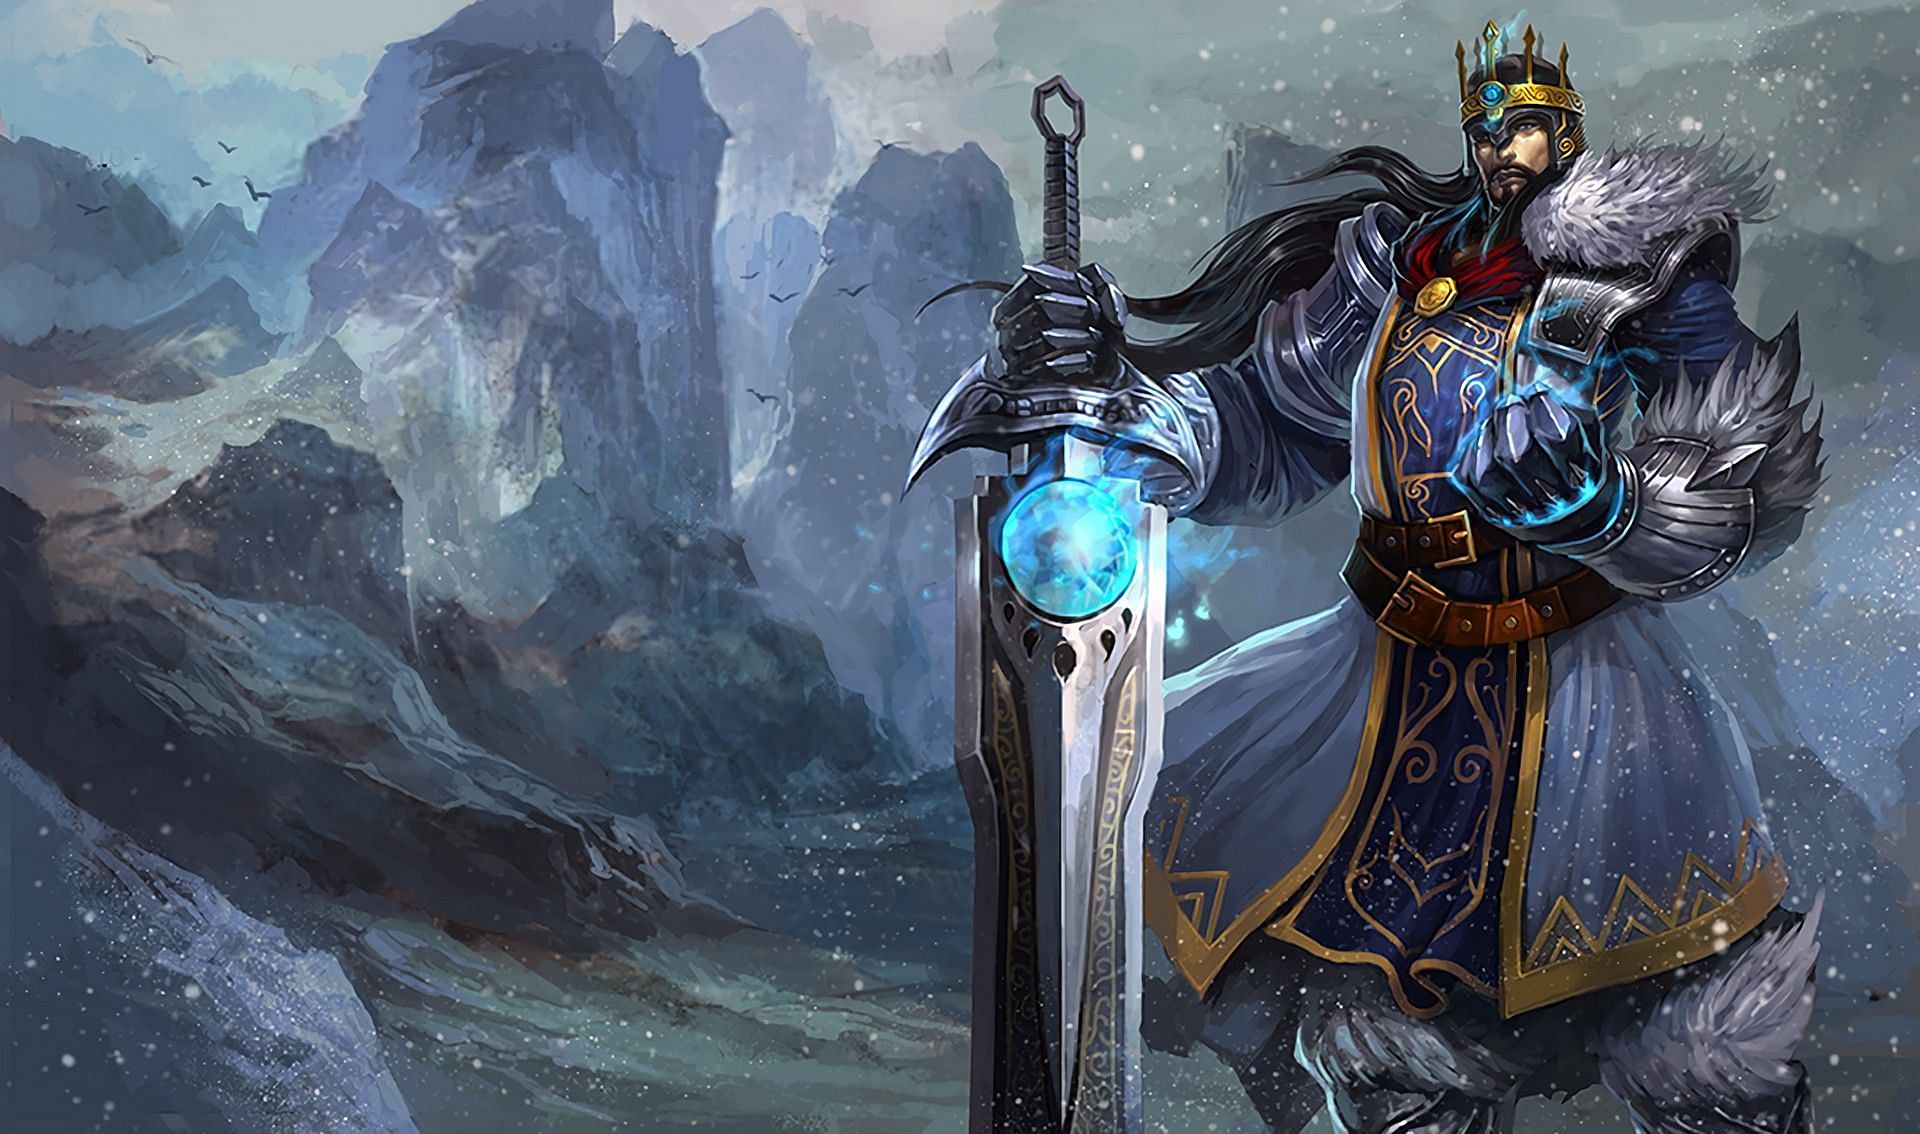 King Tryndamere (Image via League of Legends)